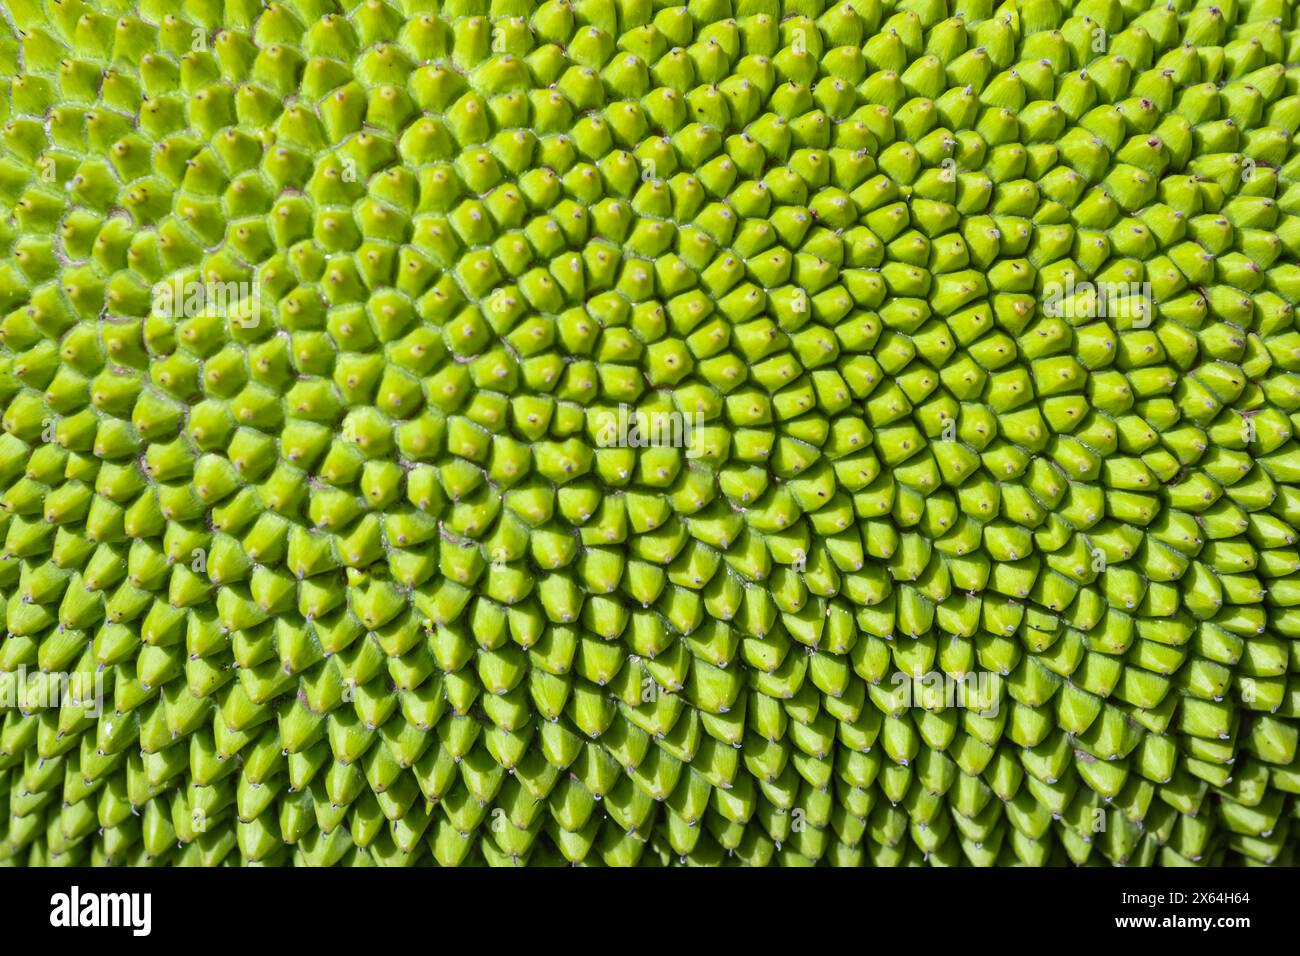 Abstract green nature blur background of young jackfruit by closeup texture of spiky skin fruit. Jack fruit and green leaves on the tree. Green jack f Stock Photo